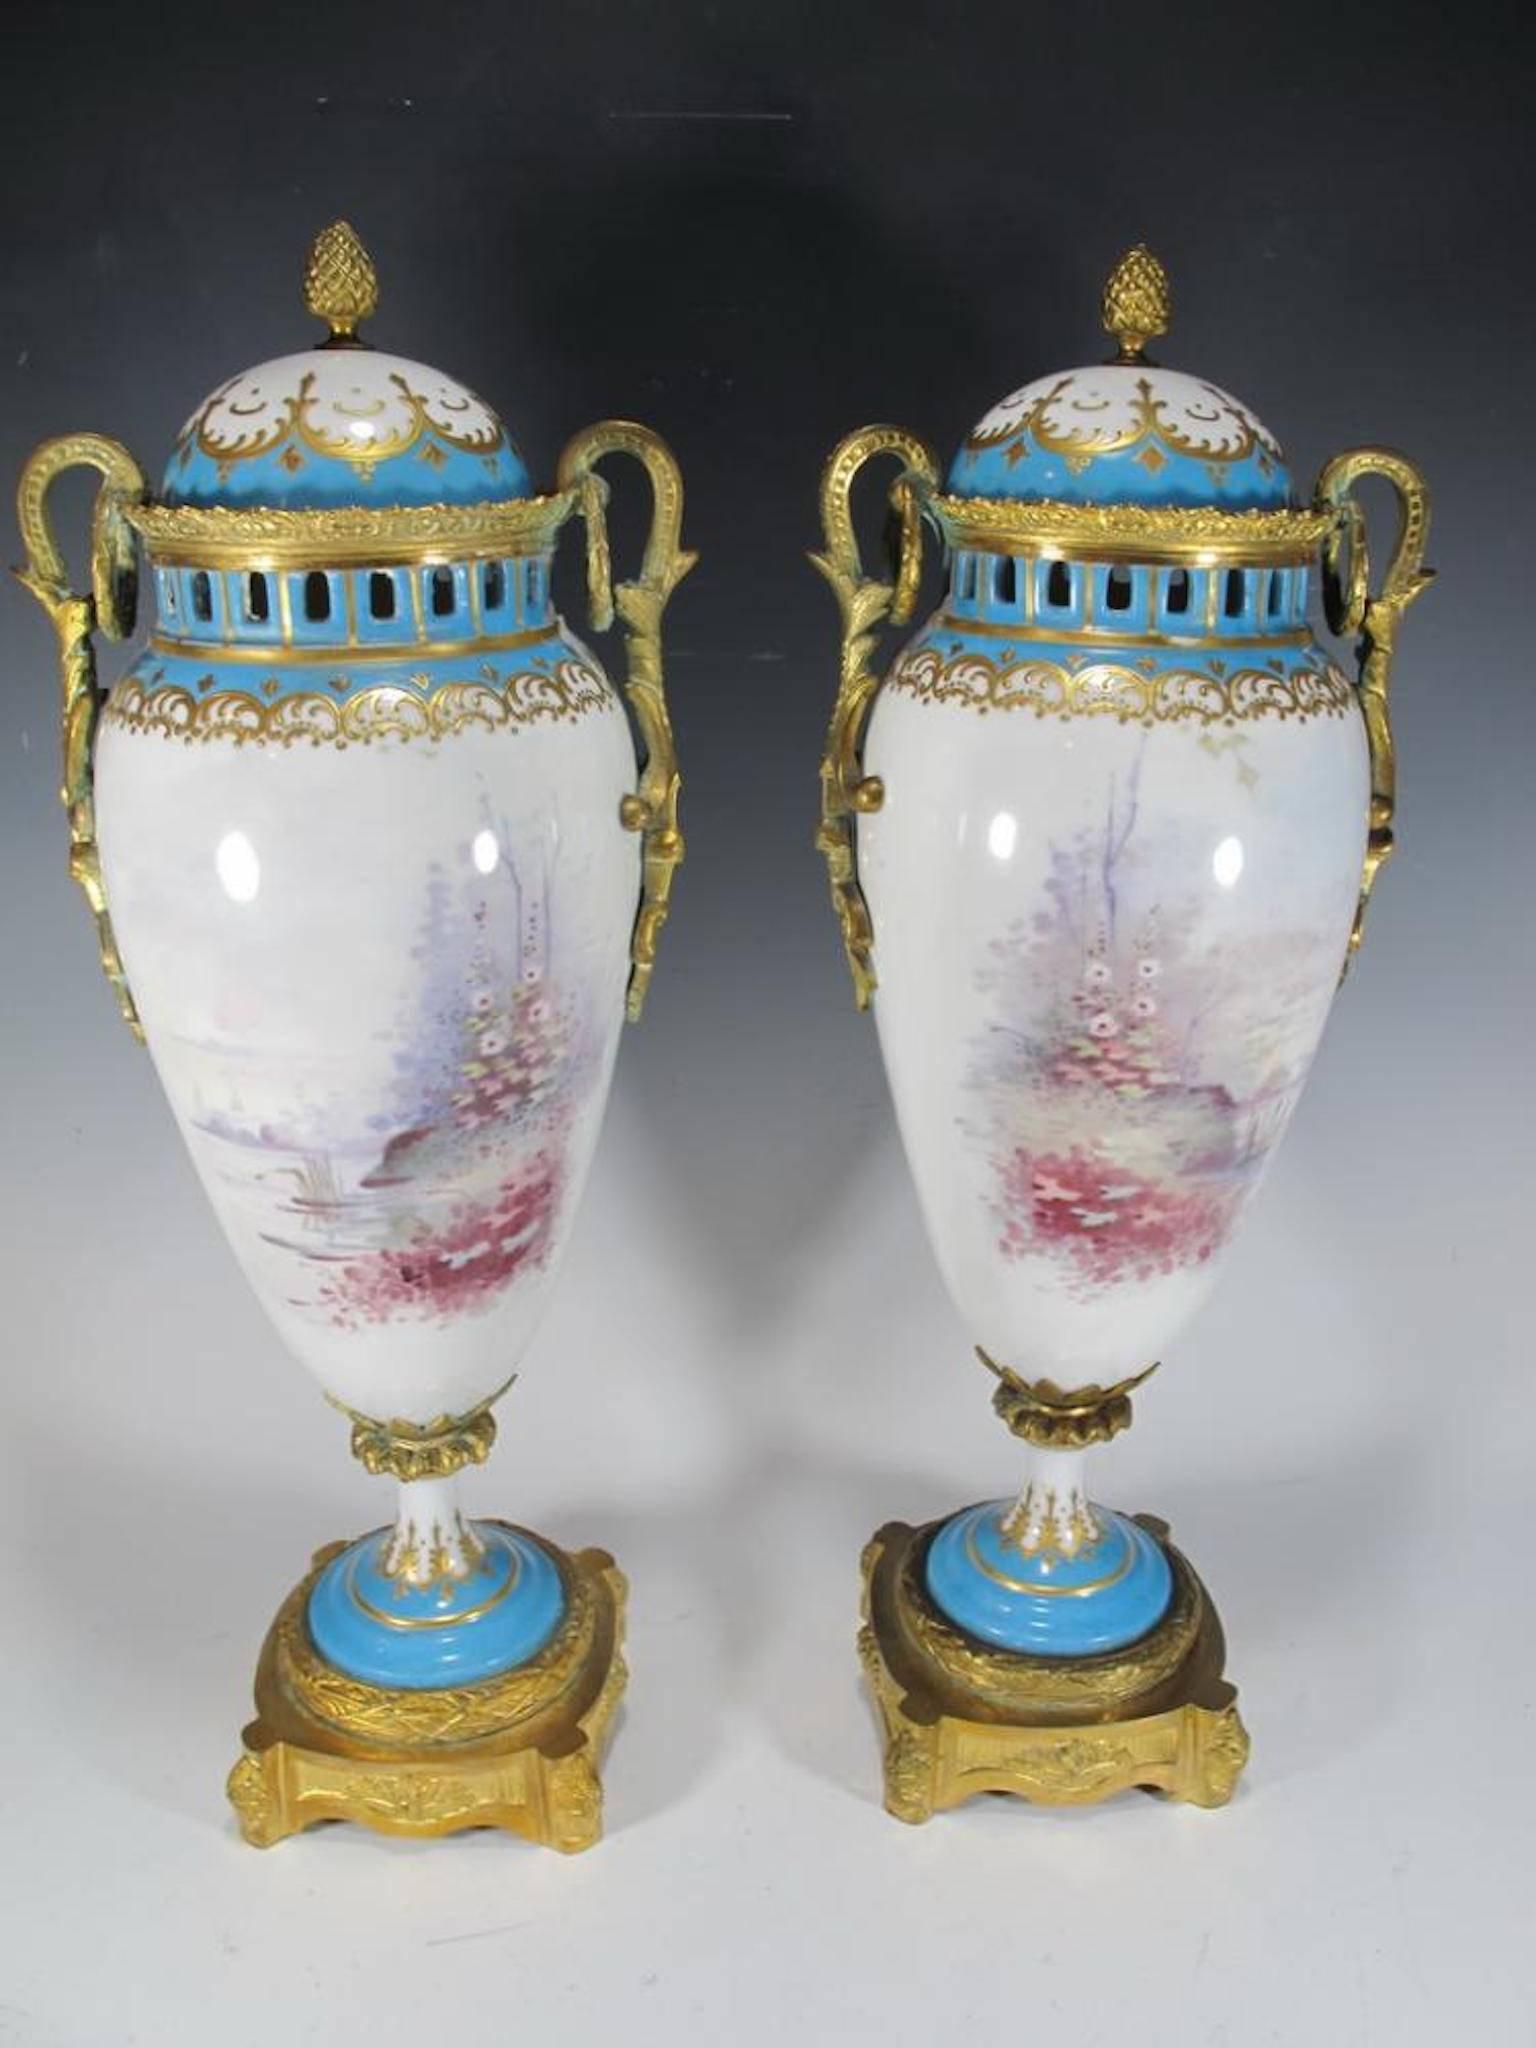 19th Century Antique French Sevres Pair of Bronze and Porcelain Urns